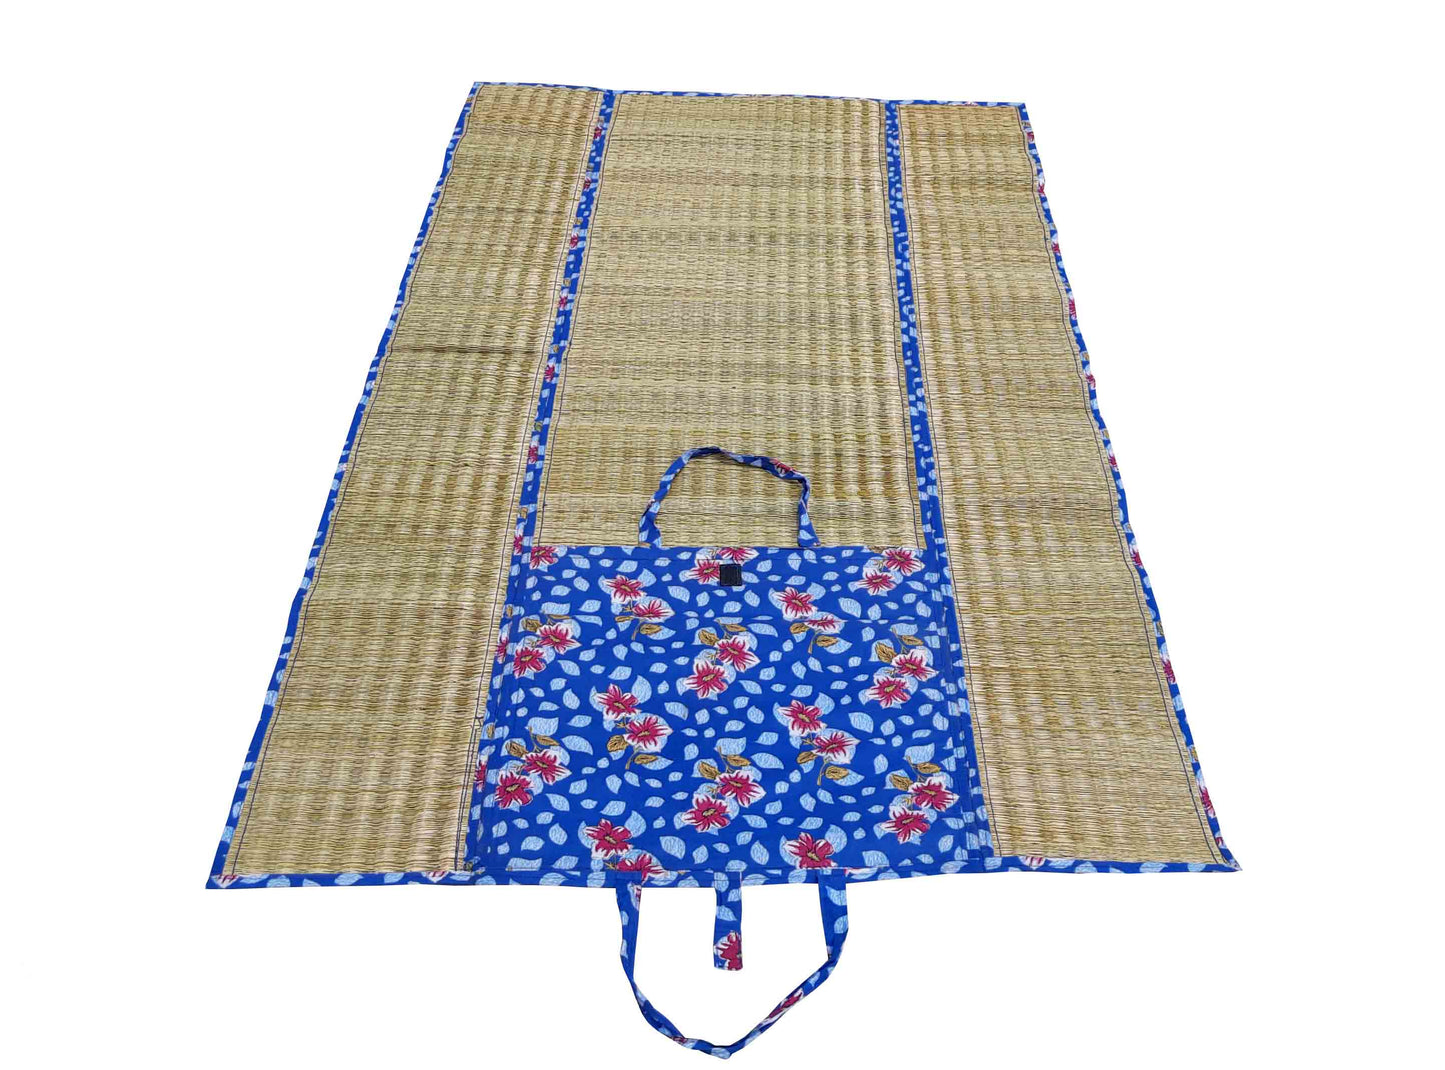 MONTISA Yoga Mat made of organic Madurkathi Grass Foldable travel friendly 36 inches x 70 inches –T2-03